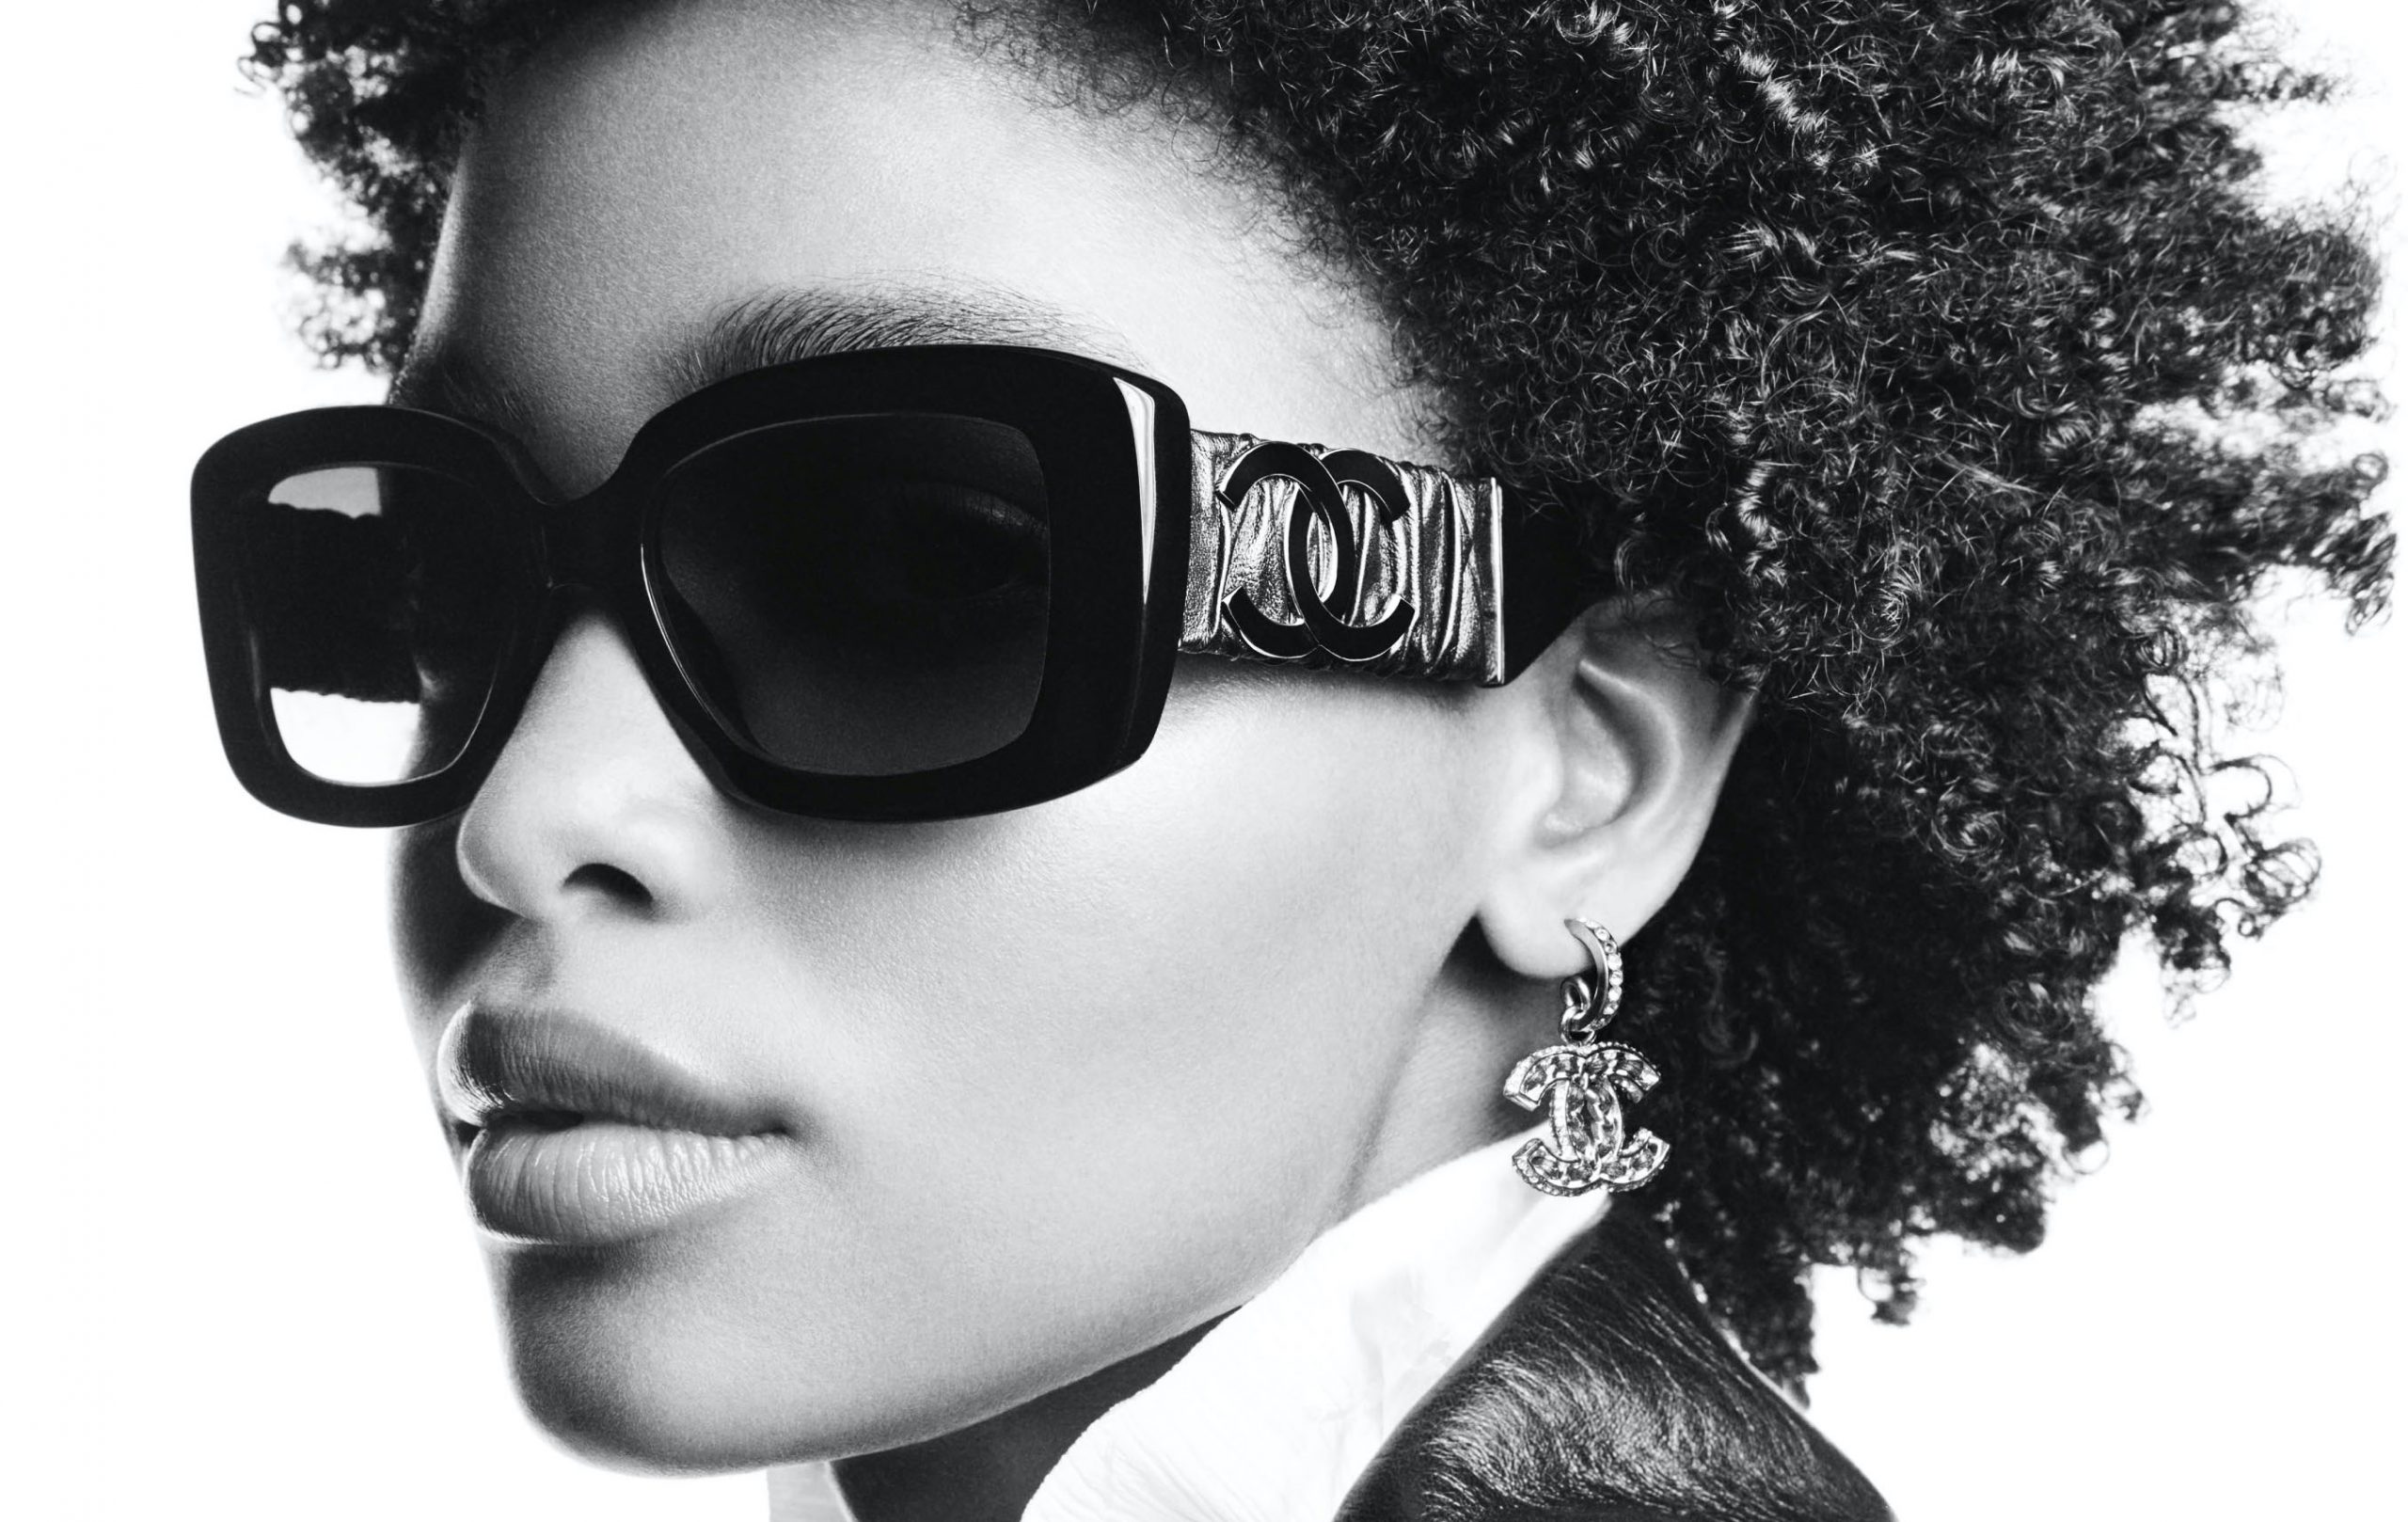 CHANEL THE 2022 EYEWEAR CAMPAIGN.